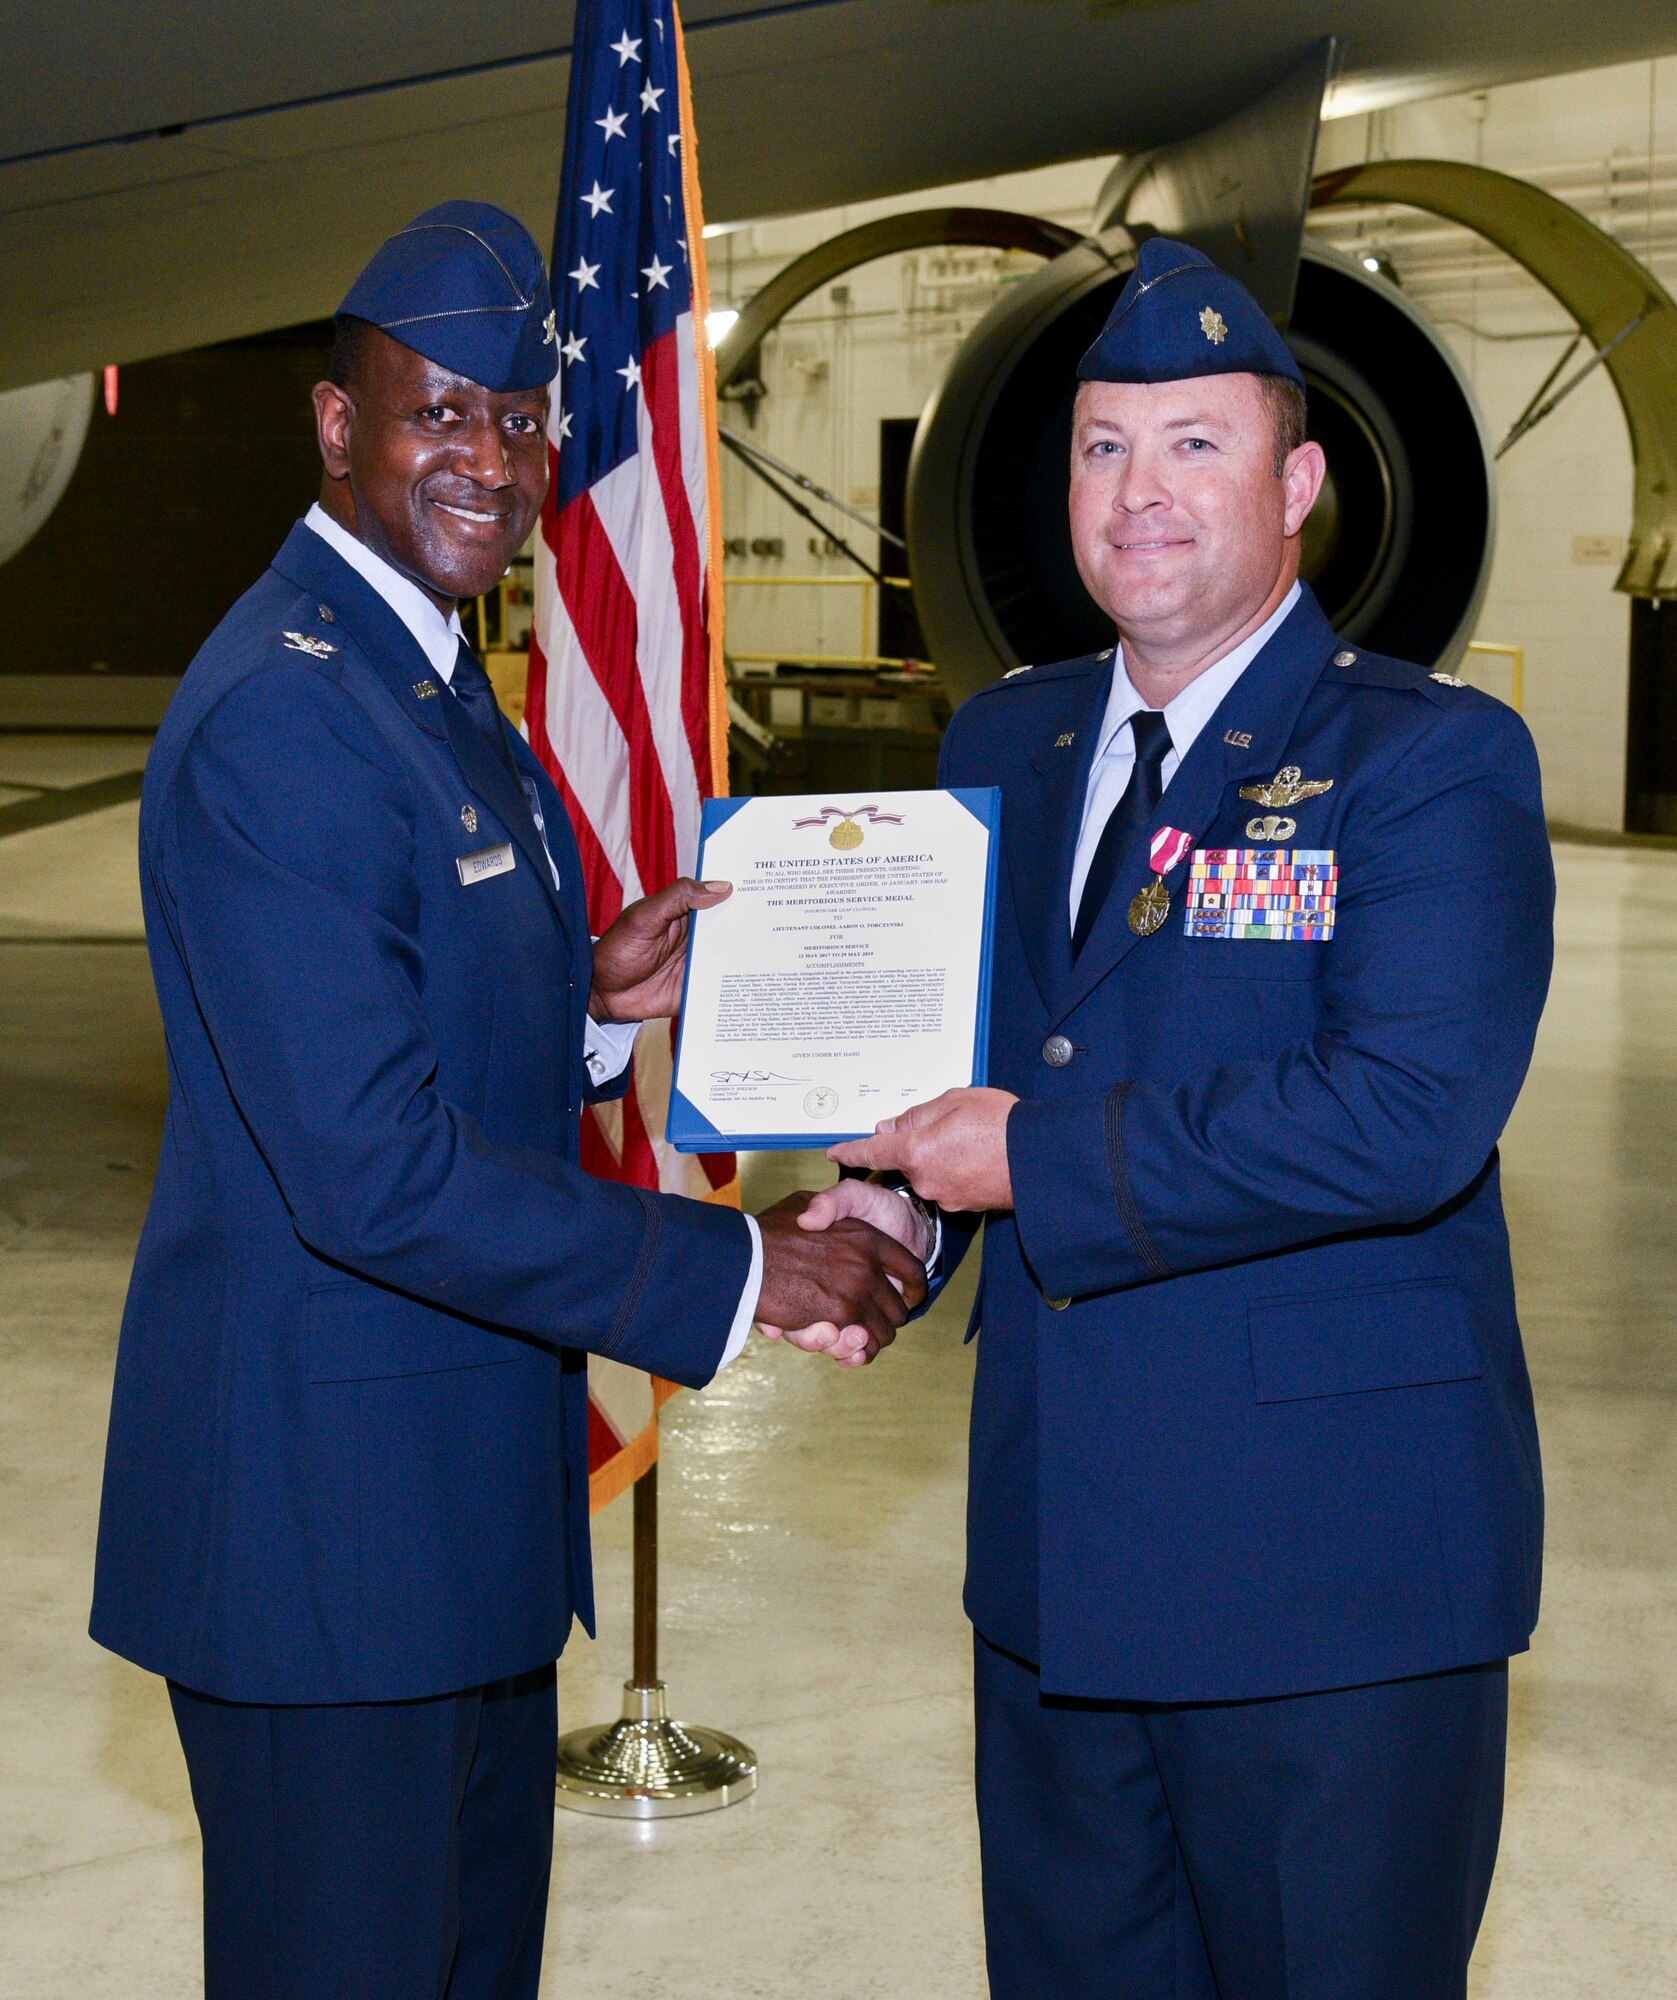 Col. Edwards Presents Award During Change of Command Ceremony